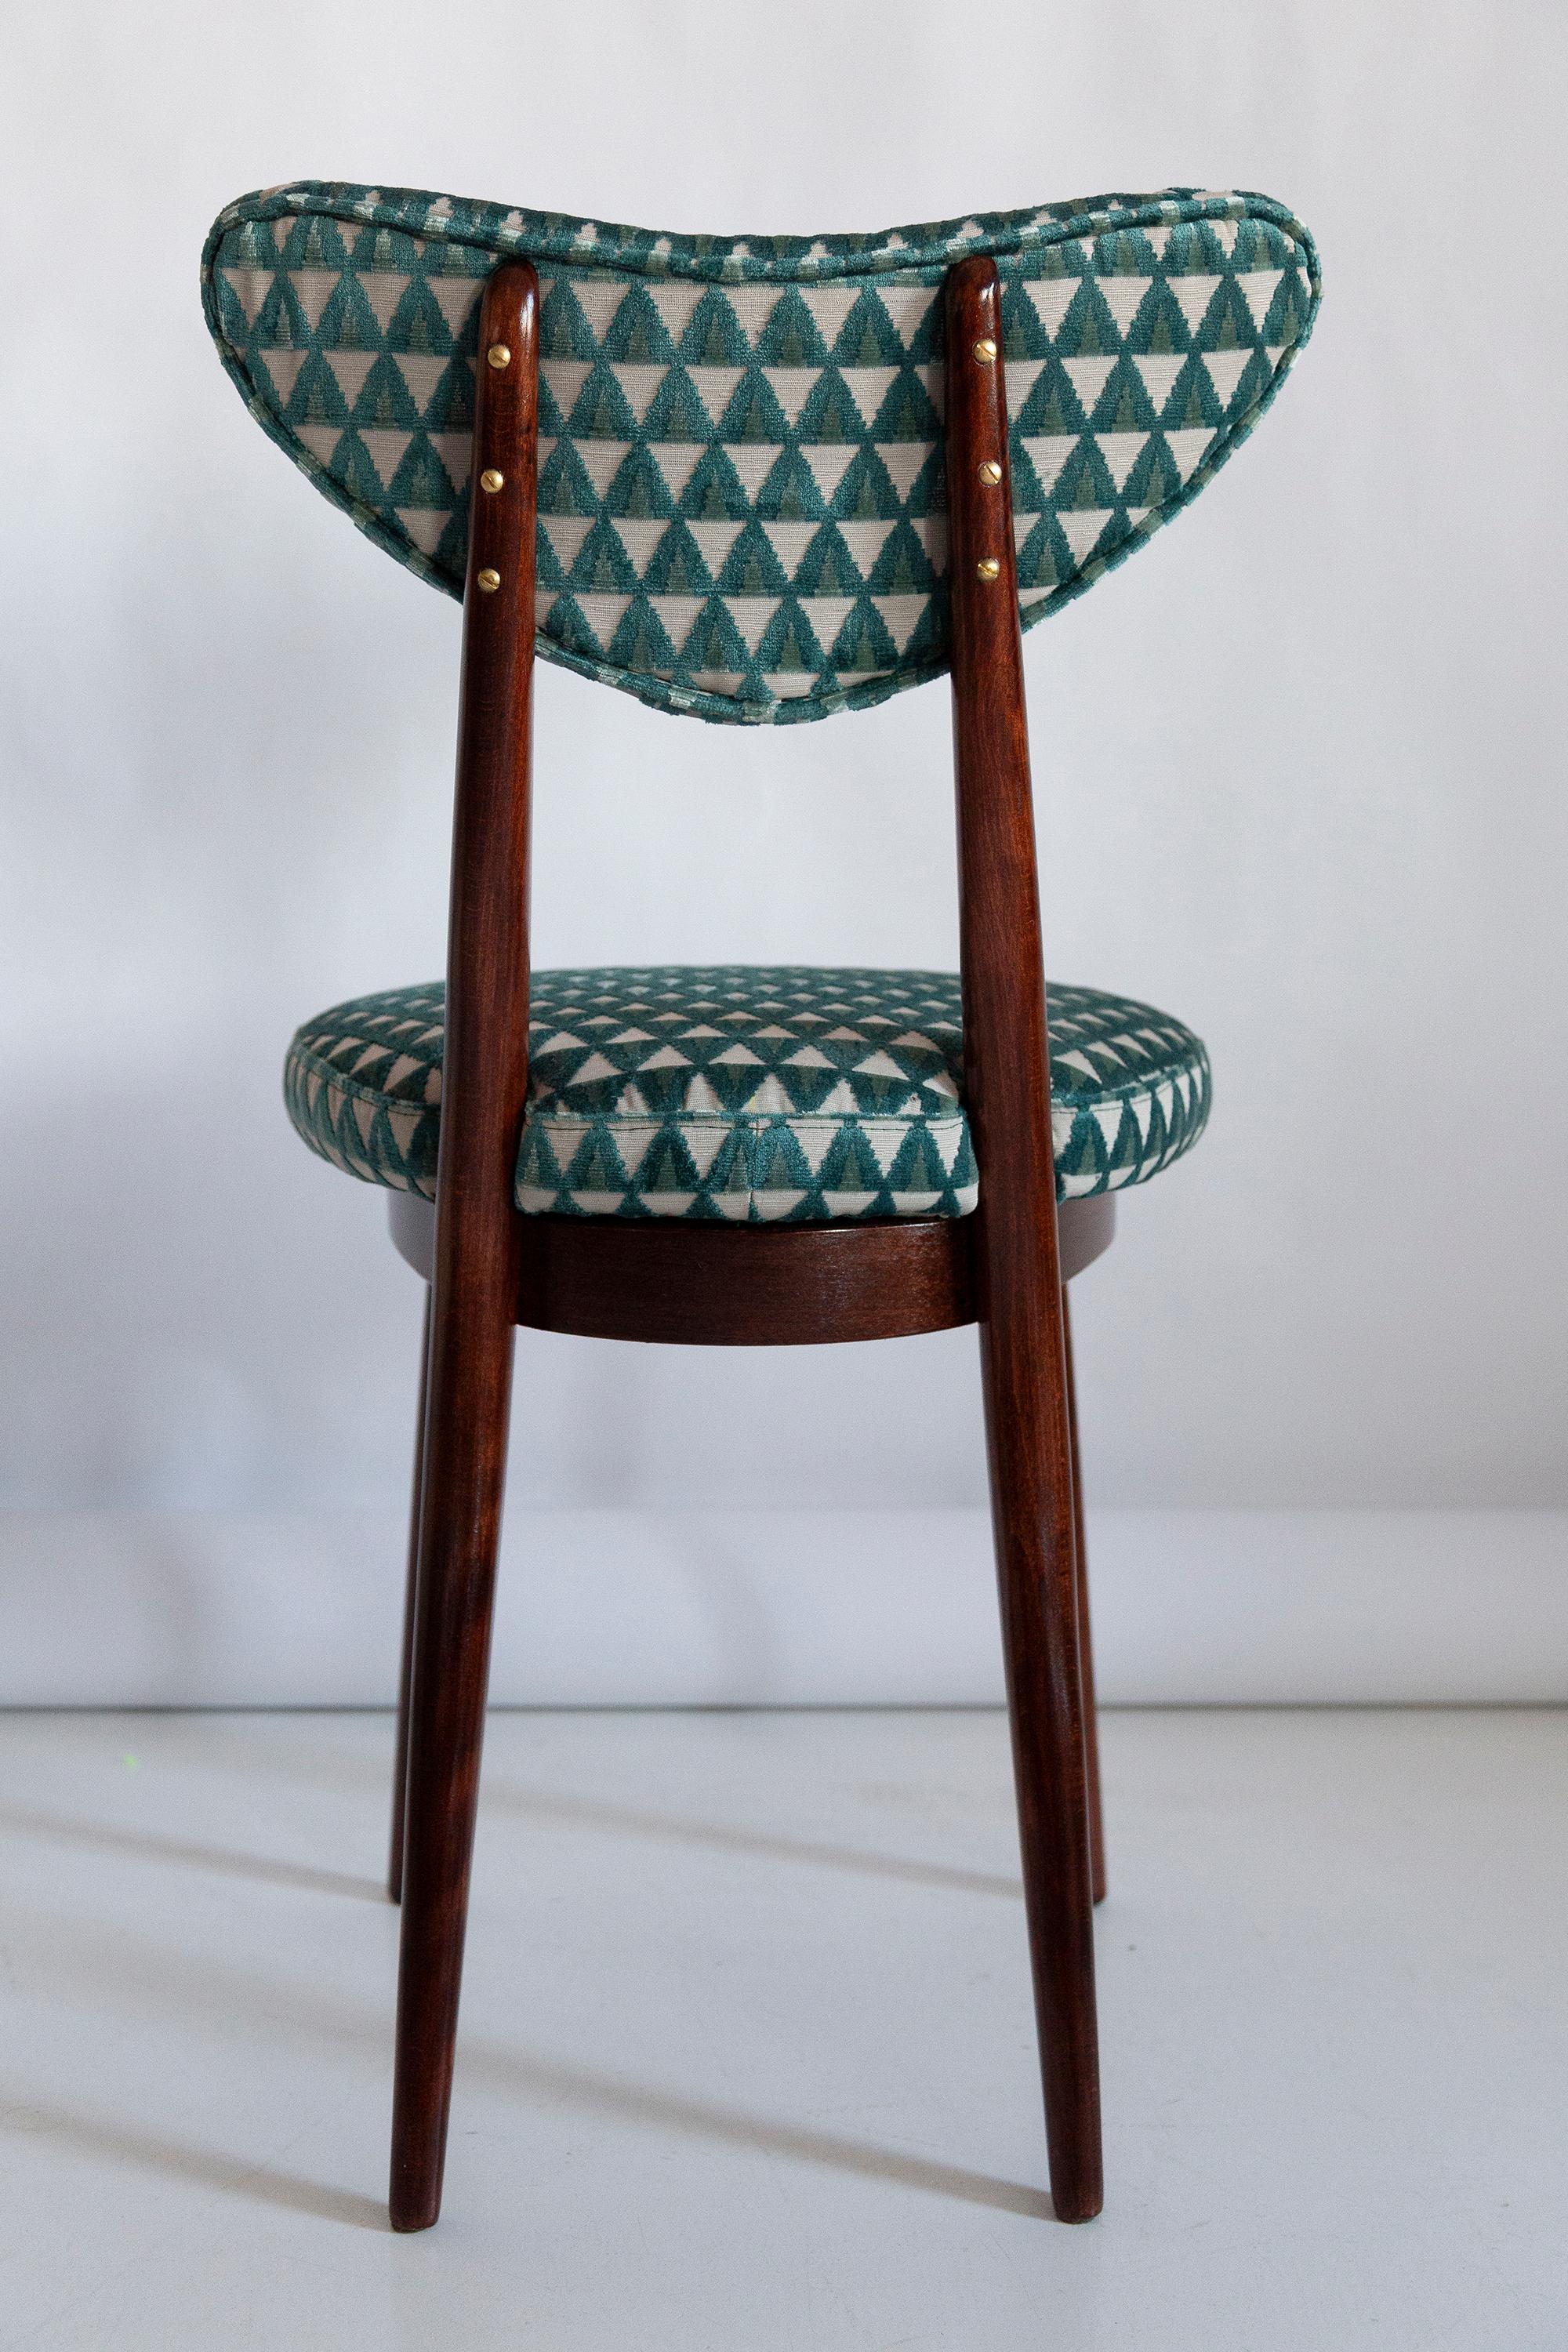 Set of Six Mid-Century Heart Chairs in Amuleto Green Velvet, Europe, 1960s For Sale 4